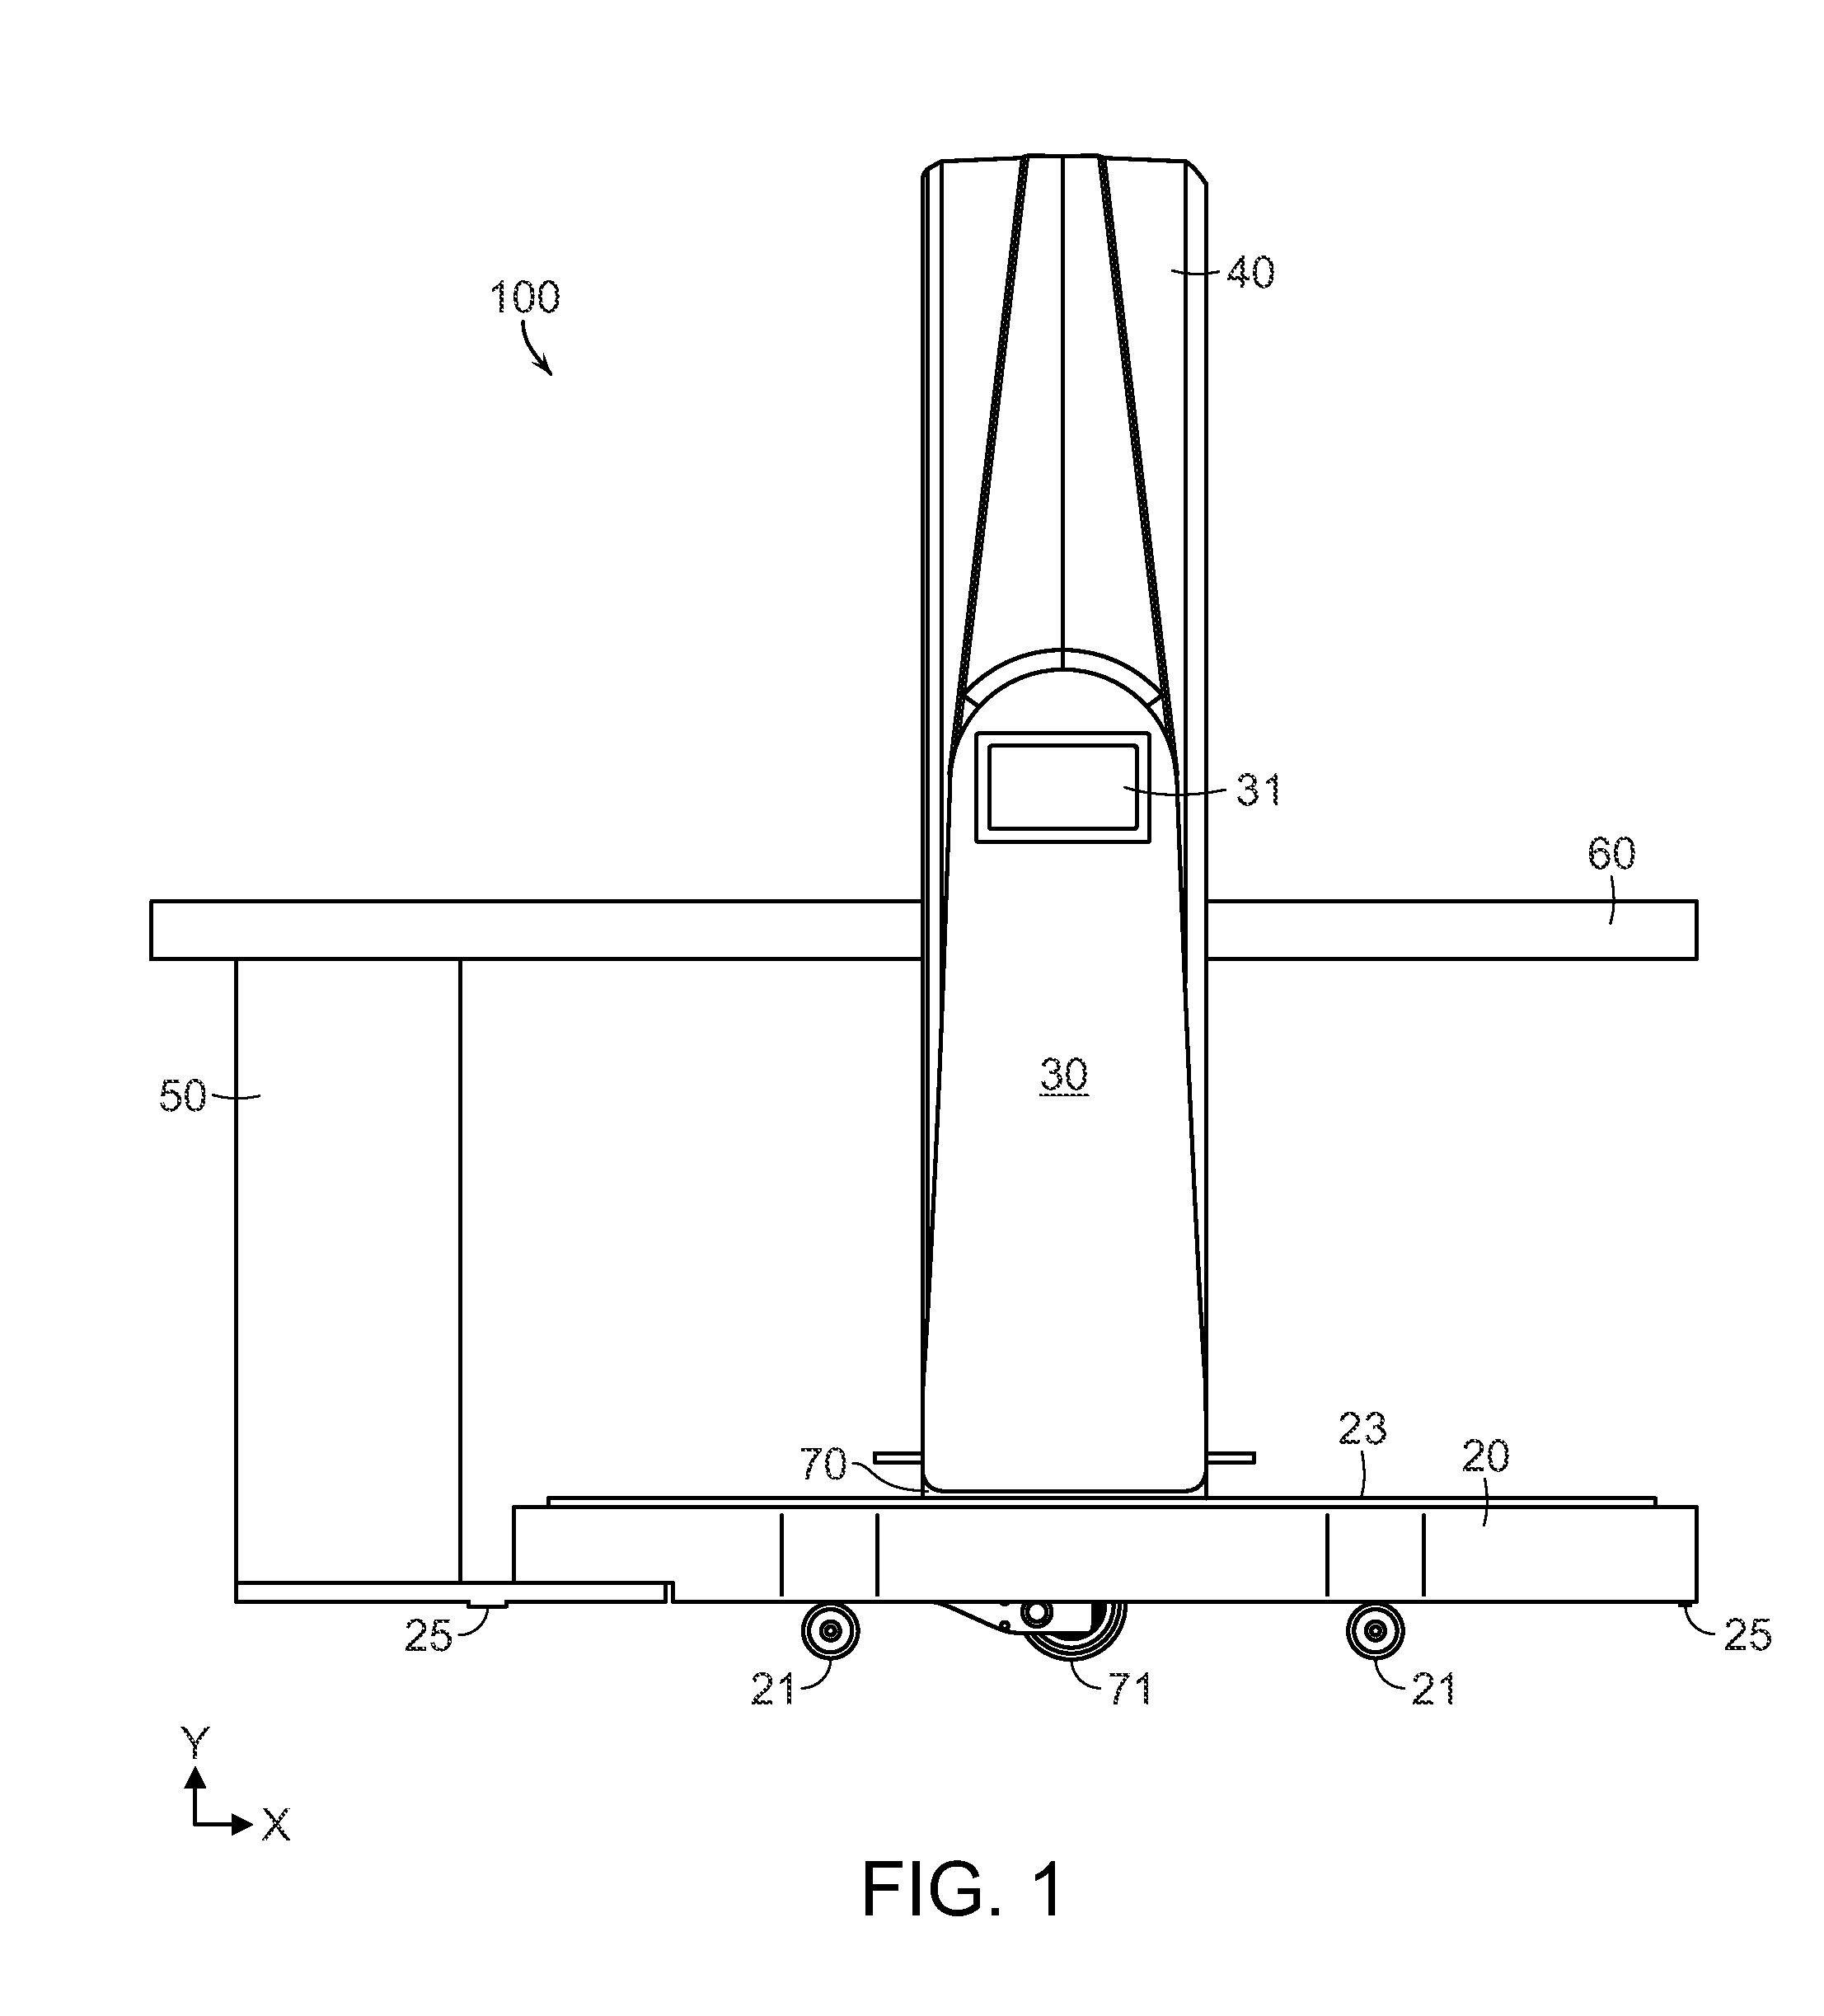 Drive system for imaging device